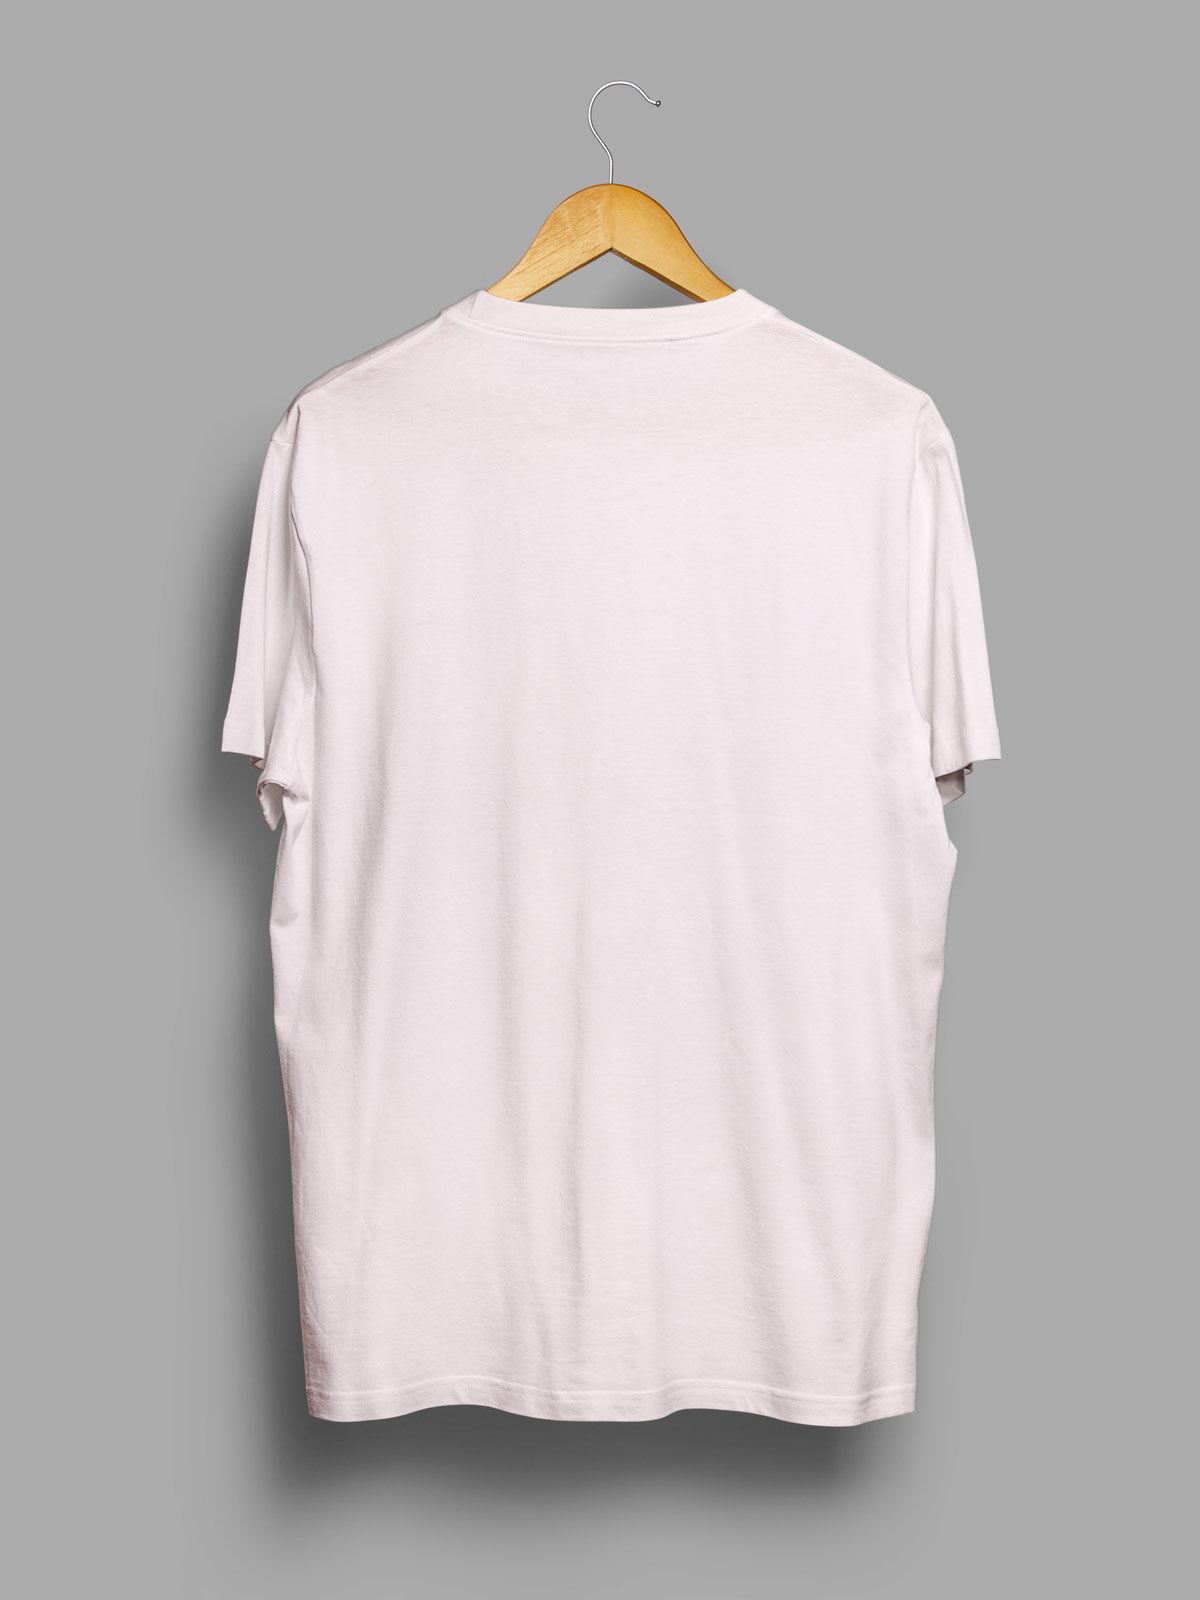 Soft-Pink-t-shirt-for-men by Ghumakkad